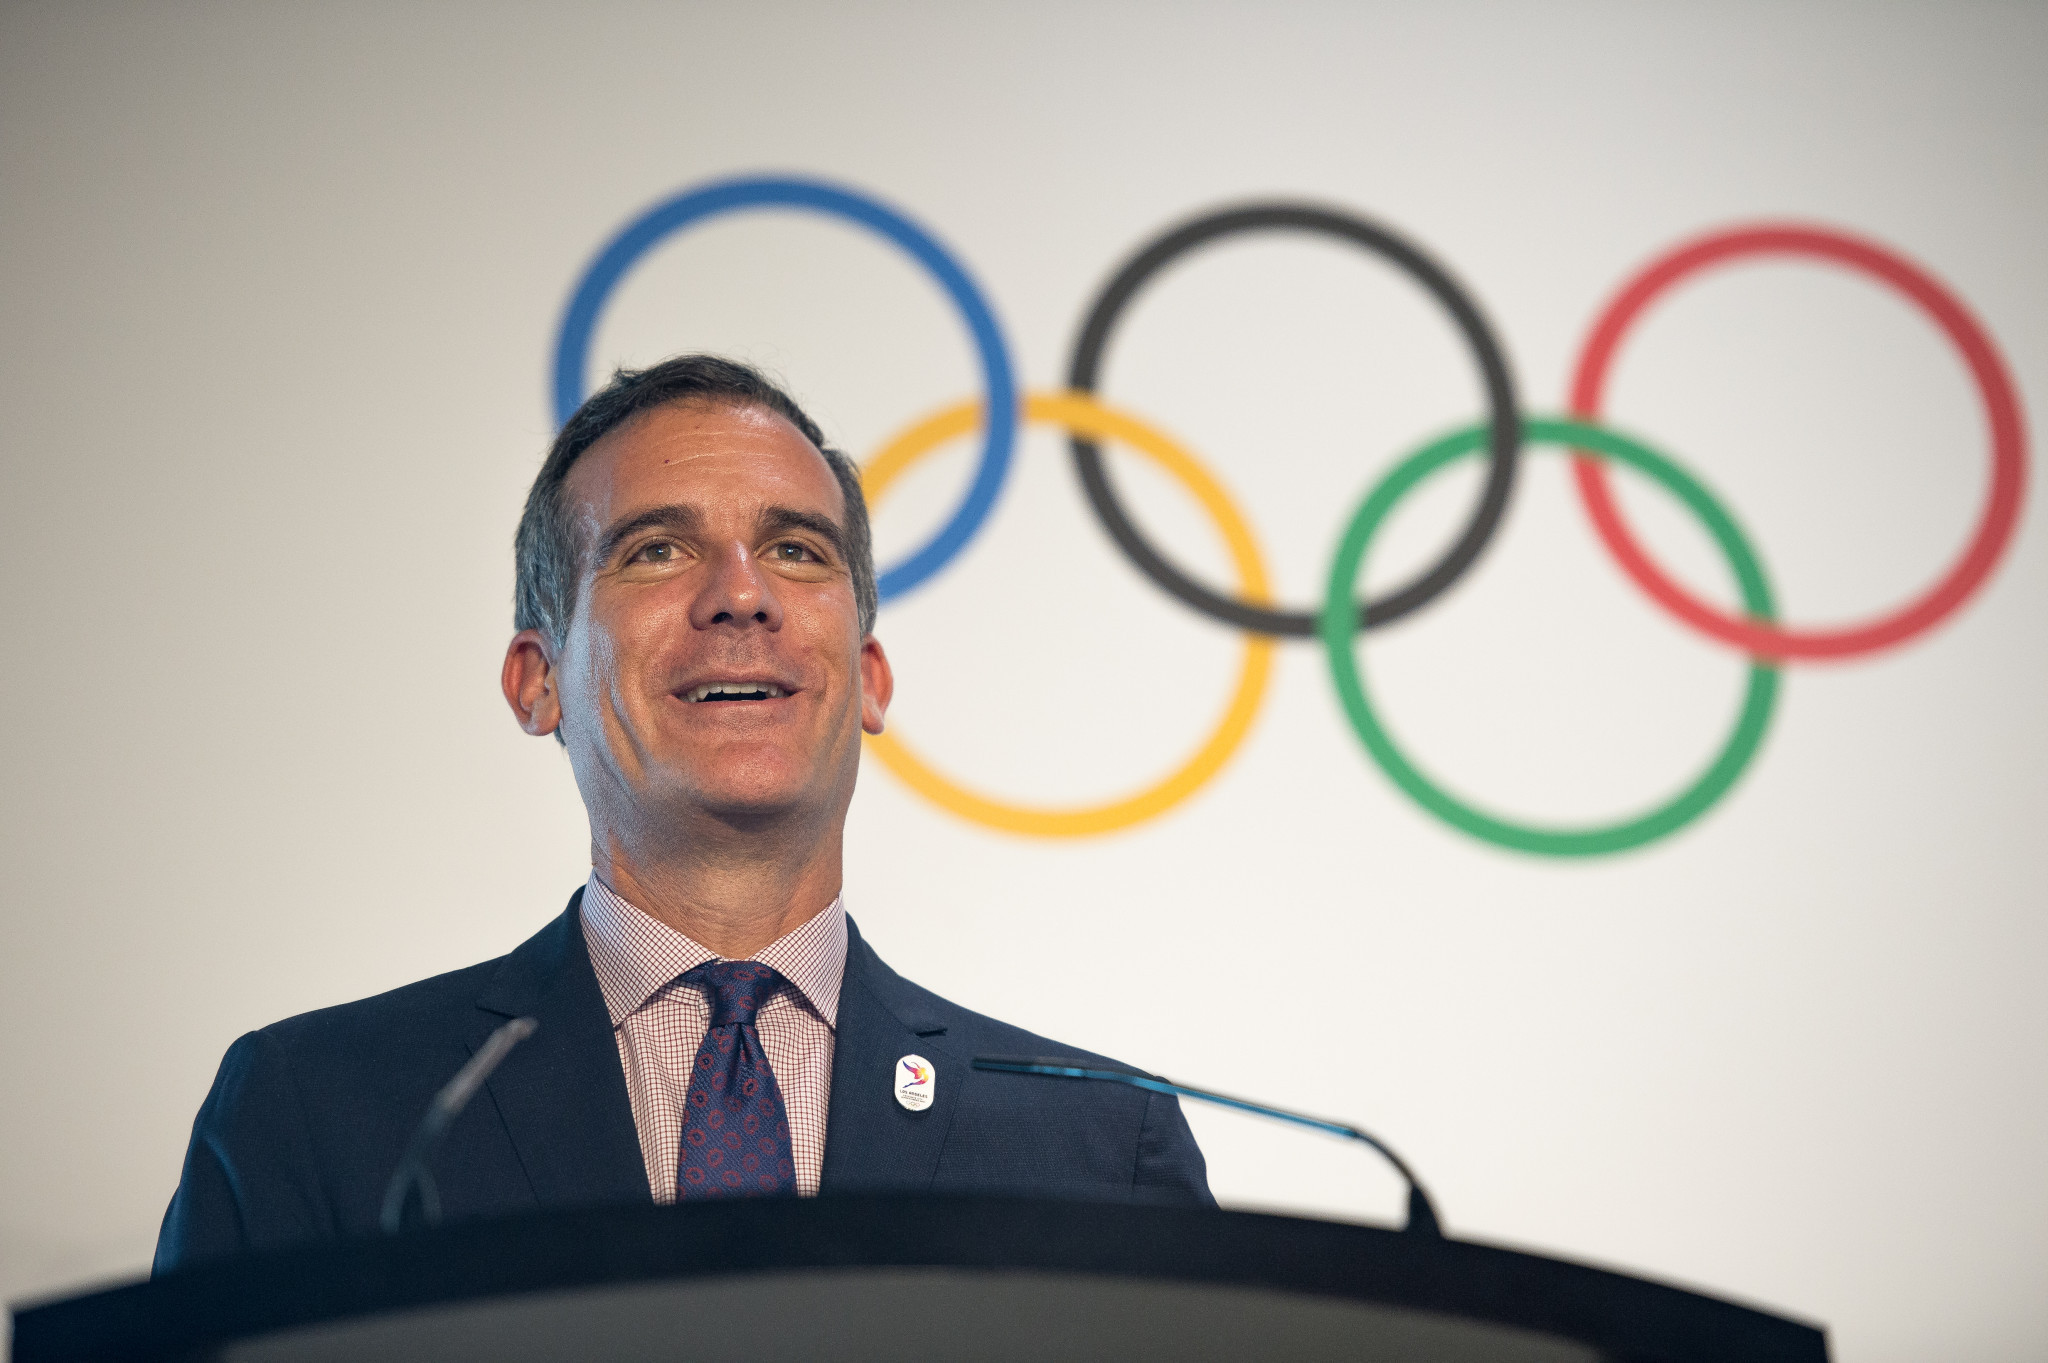 Los Angeles Mayor Garcetti tells successor to "throw the best Olympic Games" but his future unclear